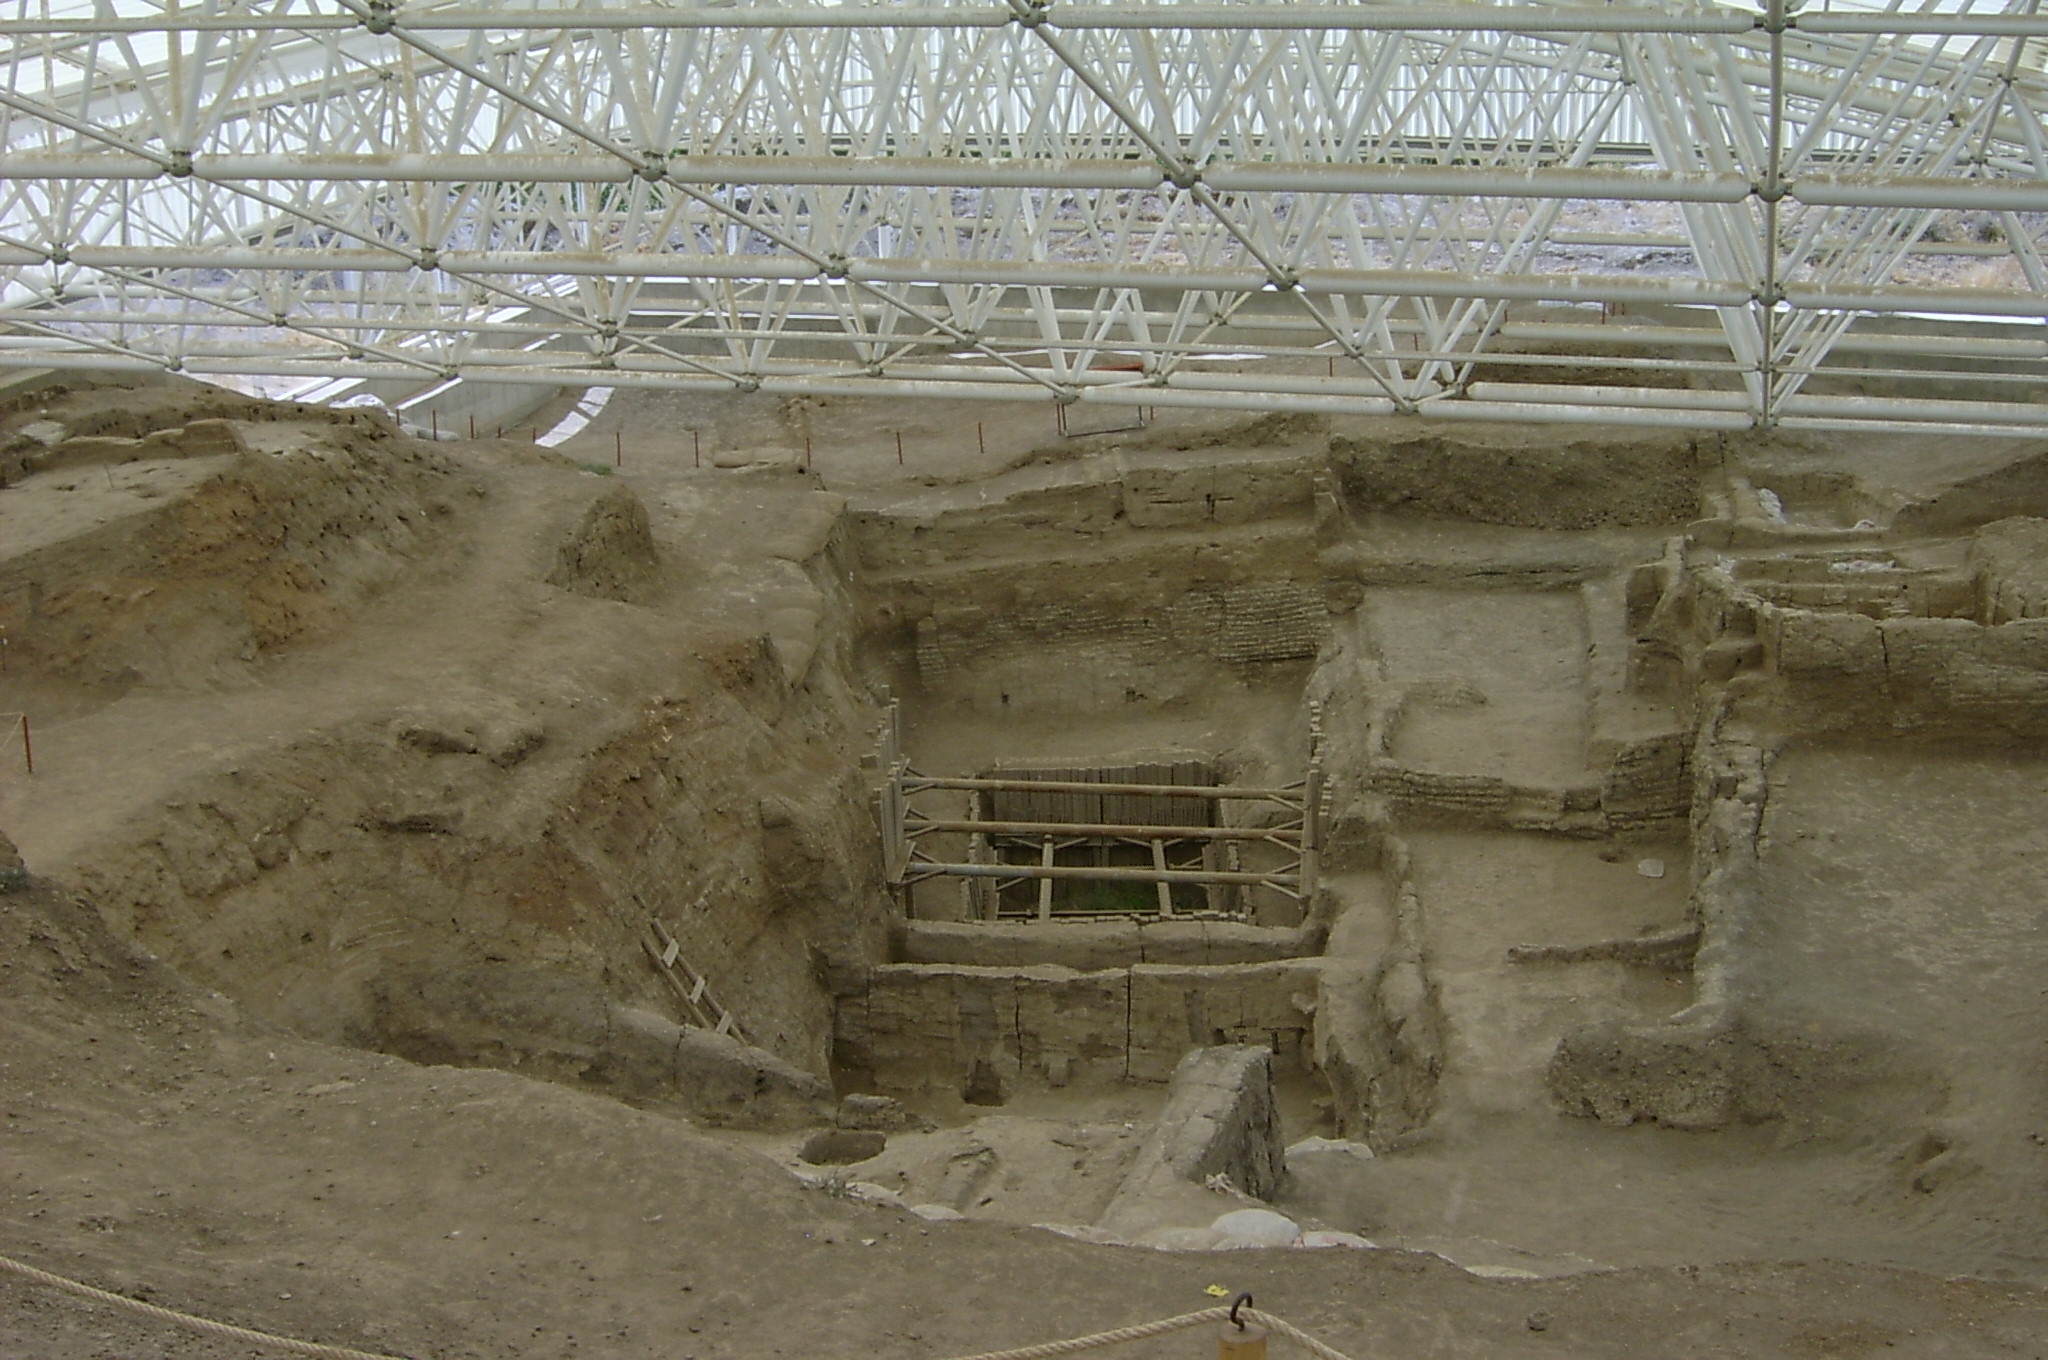 image of Çatal höyük archaeological excavation with standing stone brick architecture